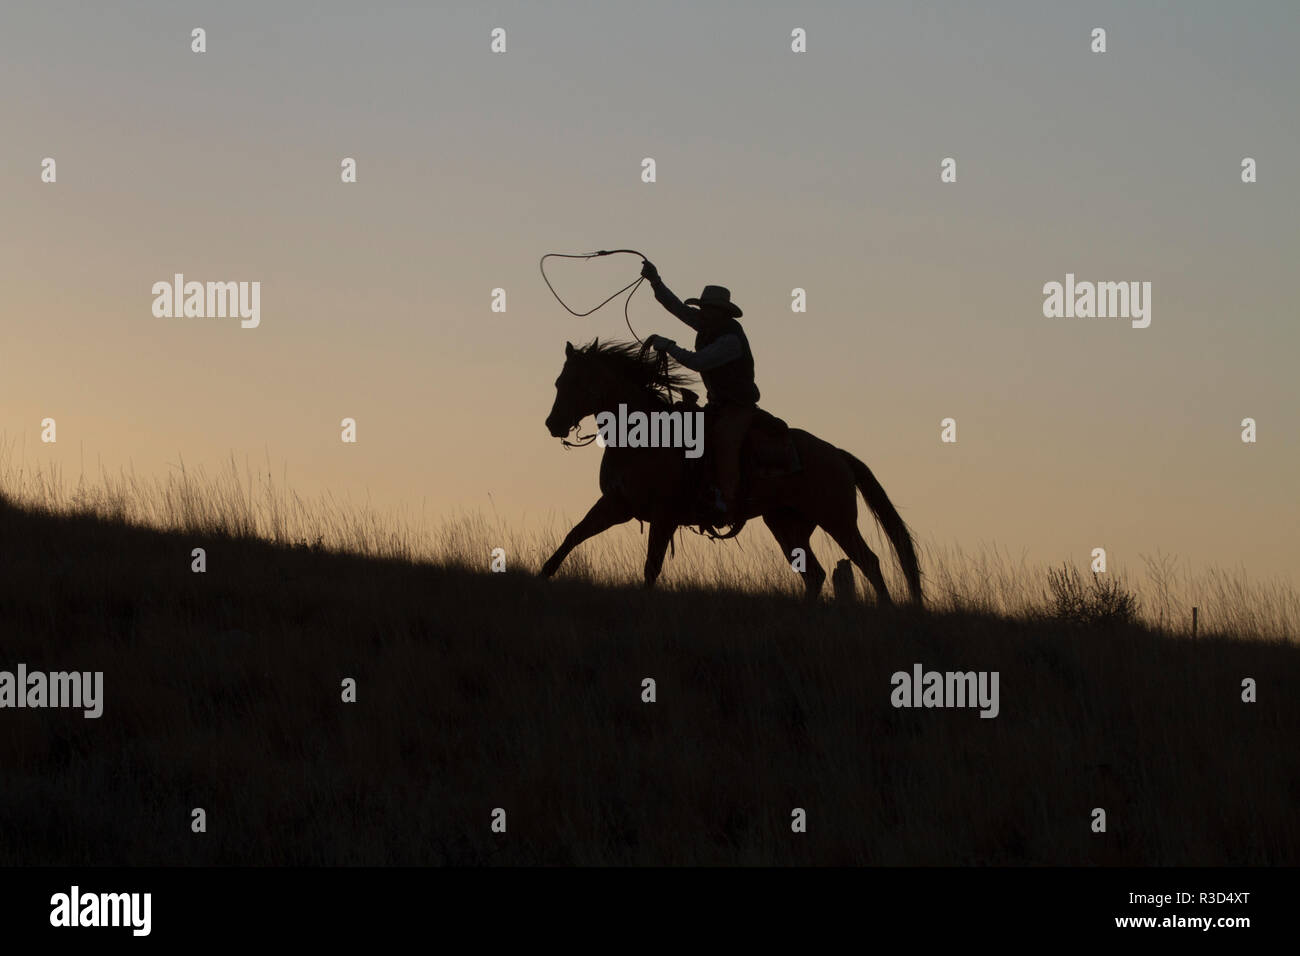 Usa, Wyoming, Shell, The Hideout Ranch, Cowboy and Lasso Silhouette at Sunset (MR, PR) Stock Photo